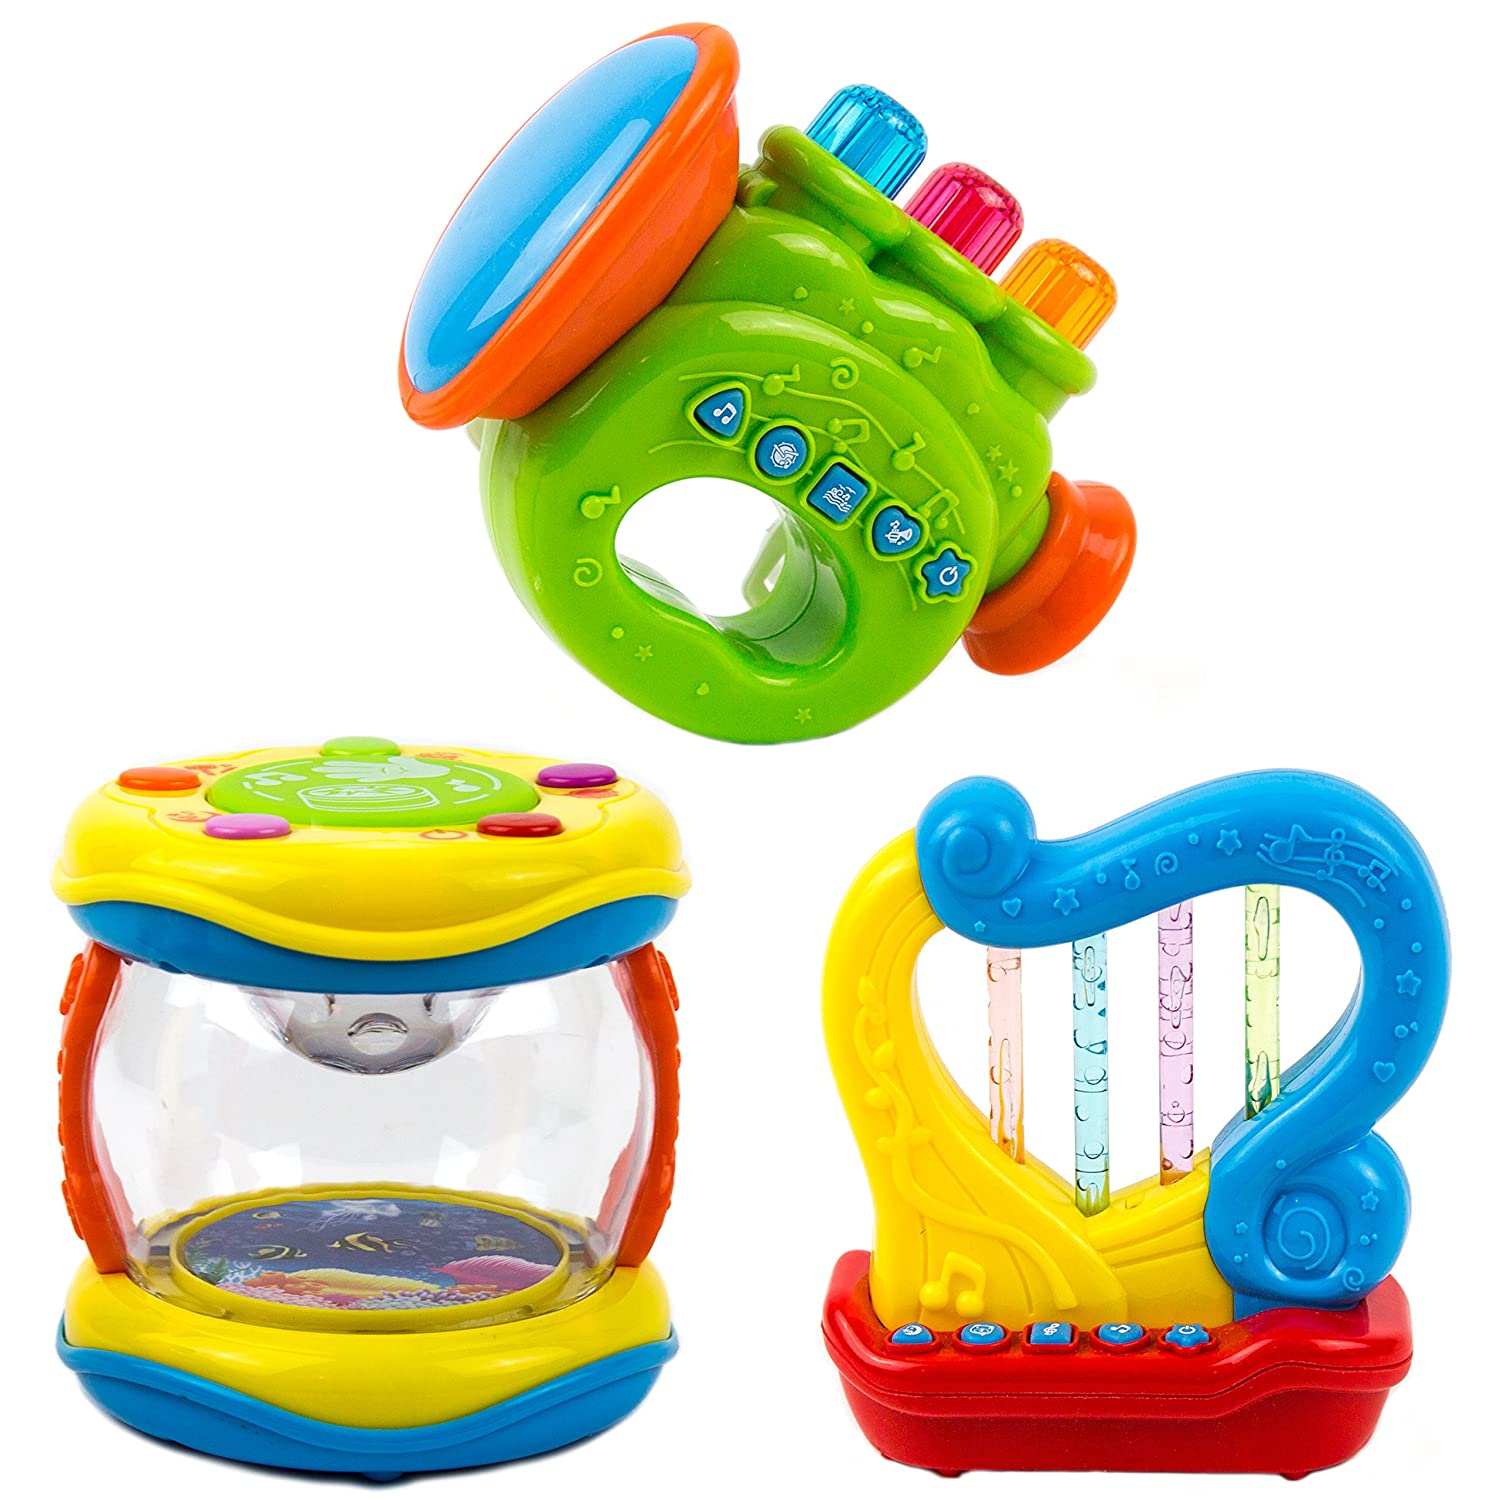 Toysery Portable Musical Toy Instruments for Toddlers, Kids - Educational Music Toy for Children